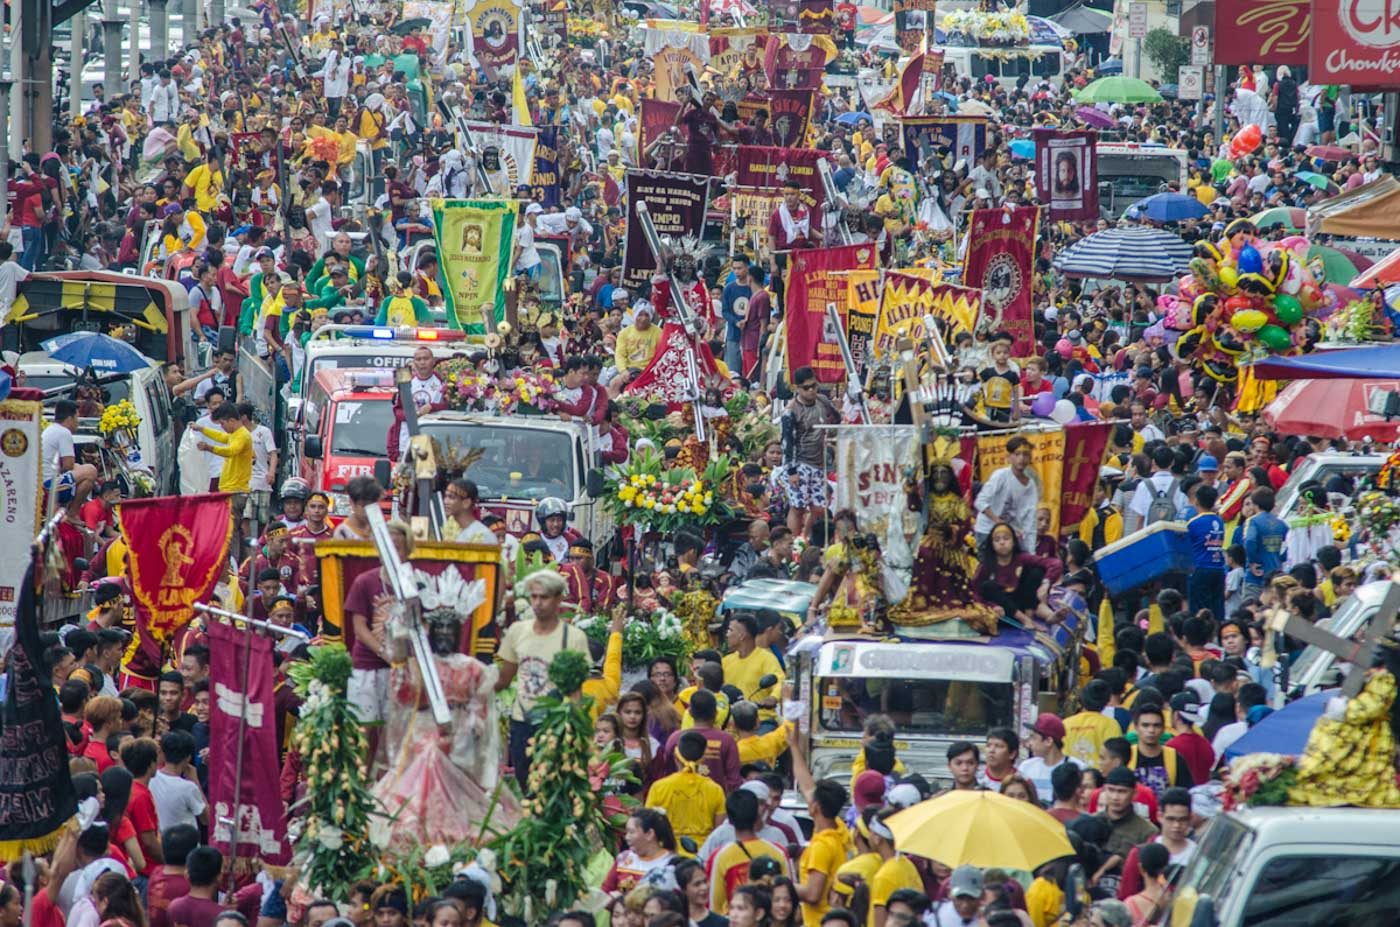 WATCH: Black Nazarene devotees seek blessings during procession of replicas